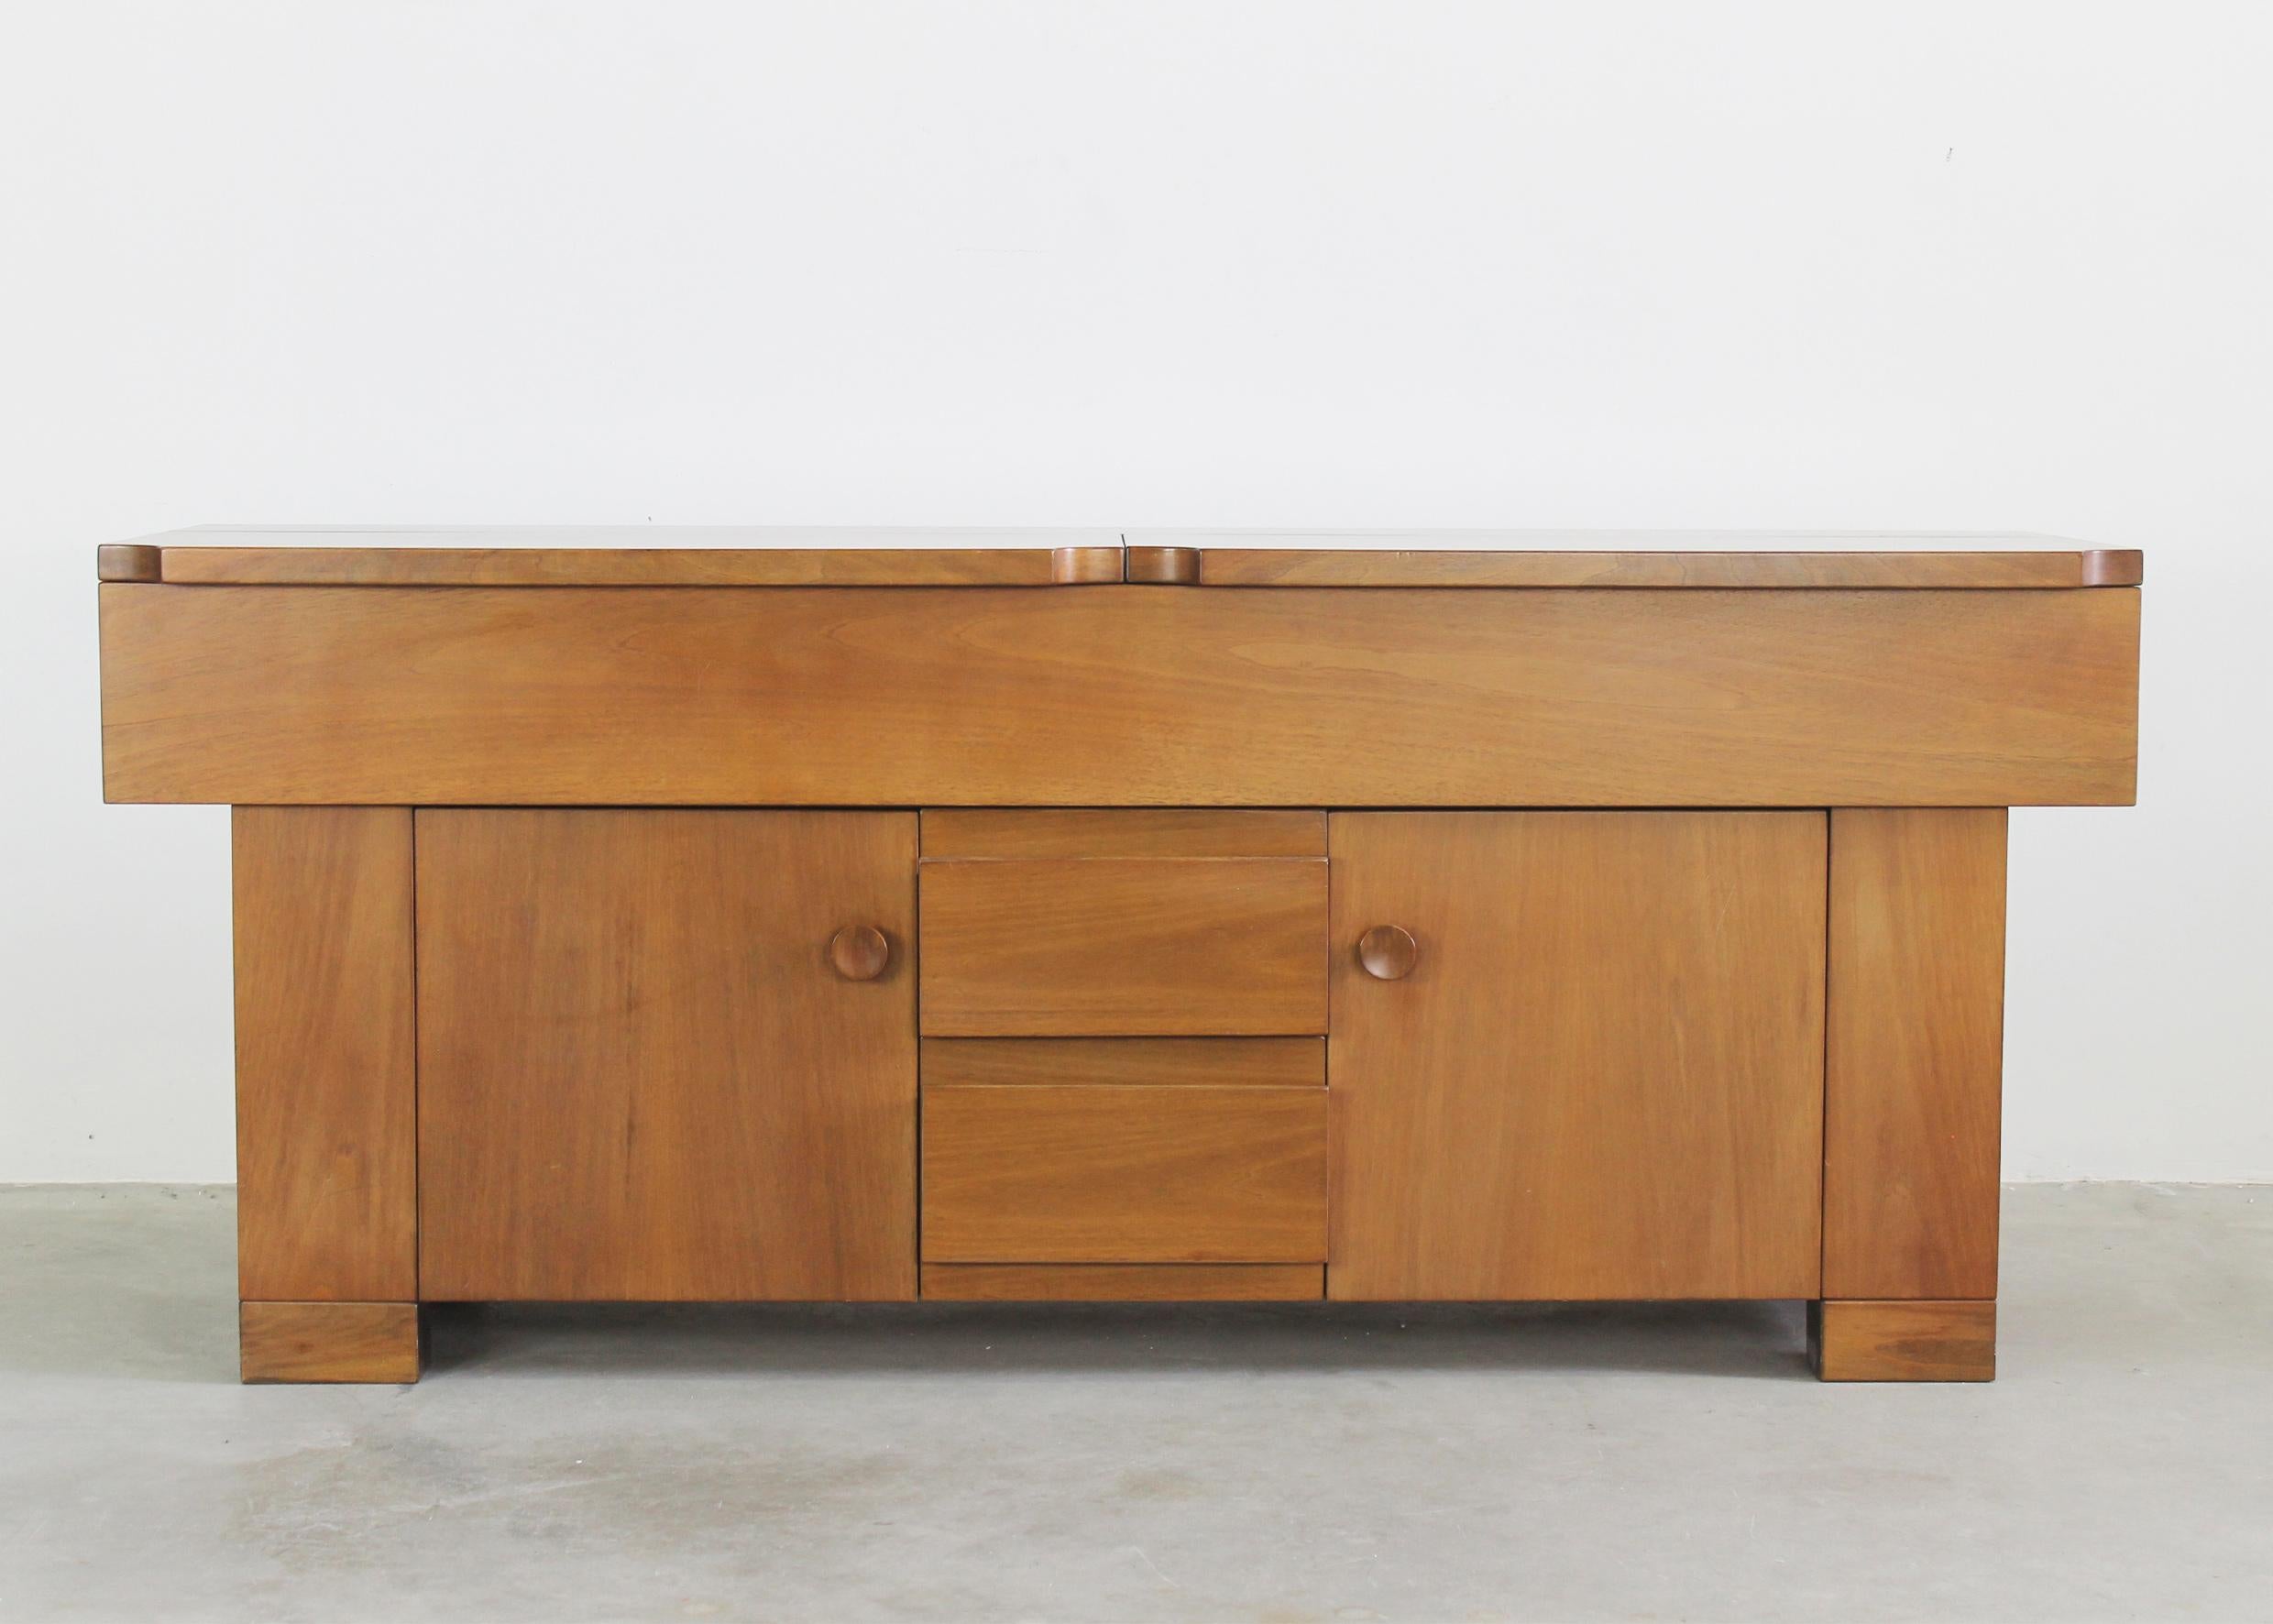 Torbecchia sideboard is entirely realized in solid veneered walnut wood, with two frontal hinging doors (inner shelves), two drawers, and a storage unit under the openable top part.

The signature of Giovanni Michelucci is visible on a sideboard